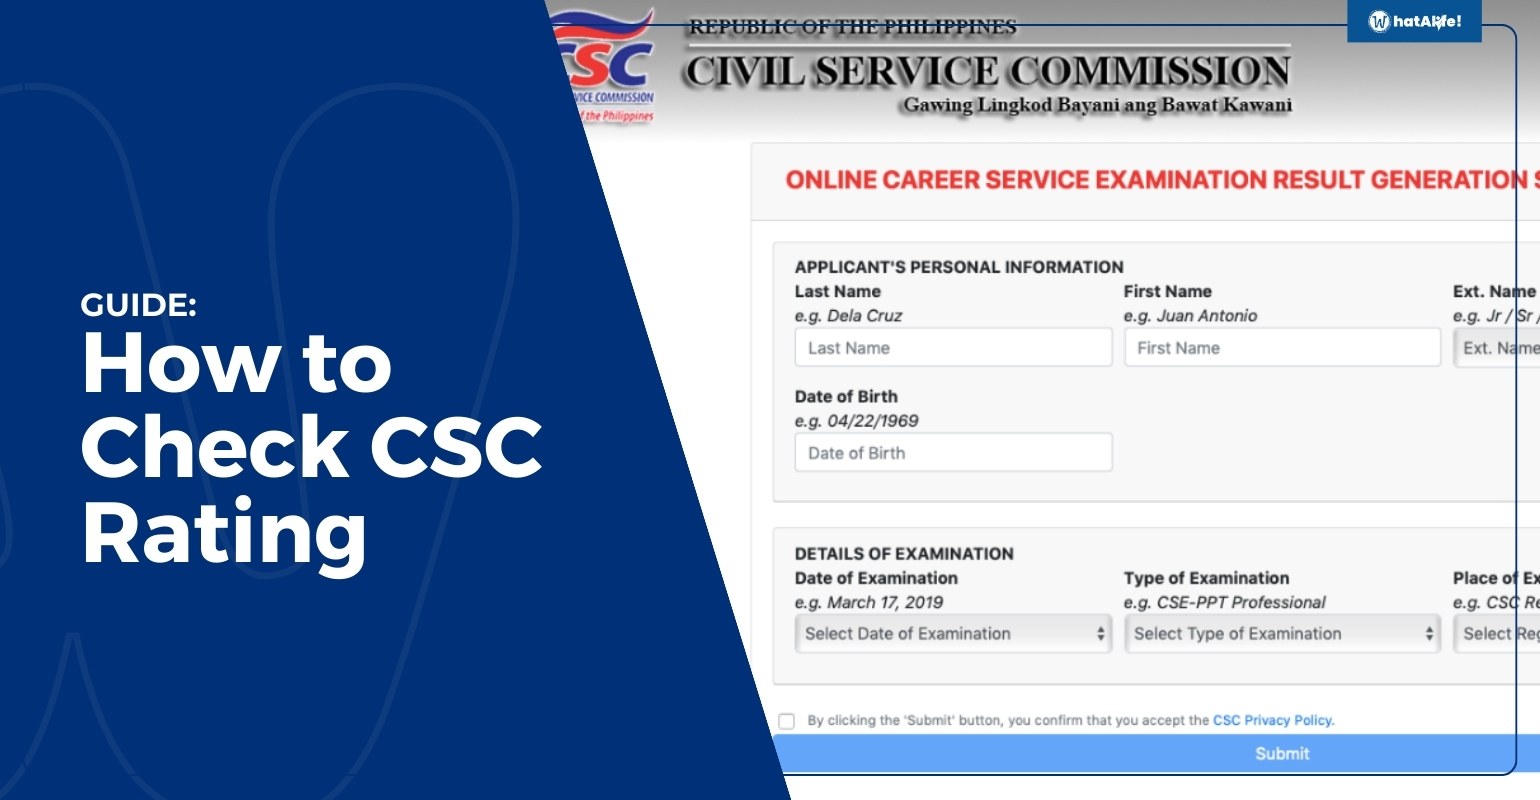 GUIDE: How to Check CSC Rating 